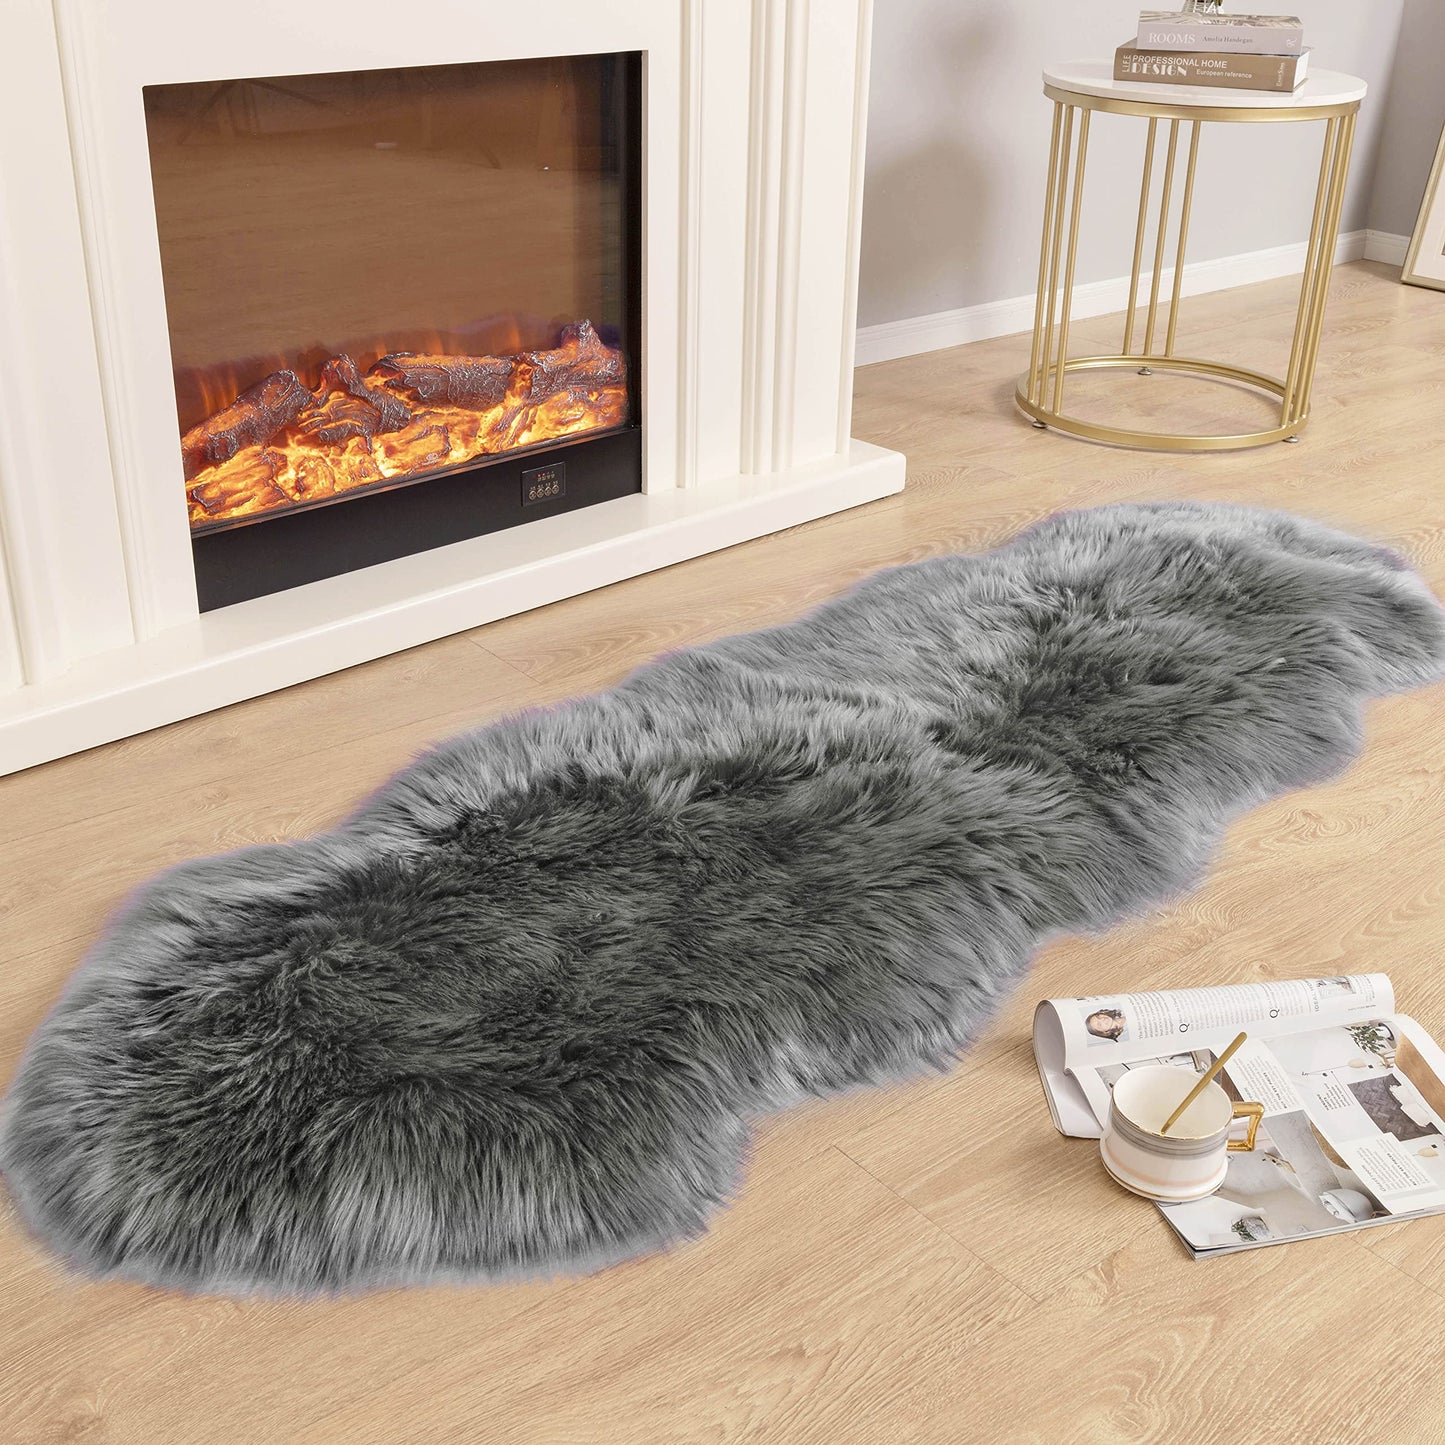 Luxury Soft Faux Sheepskin Couch Seat Cushion Fake Fur Area Rugs-2ft x 6ft, Gray